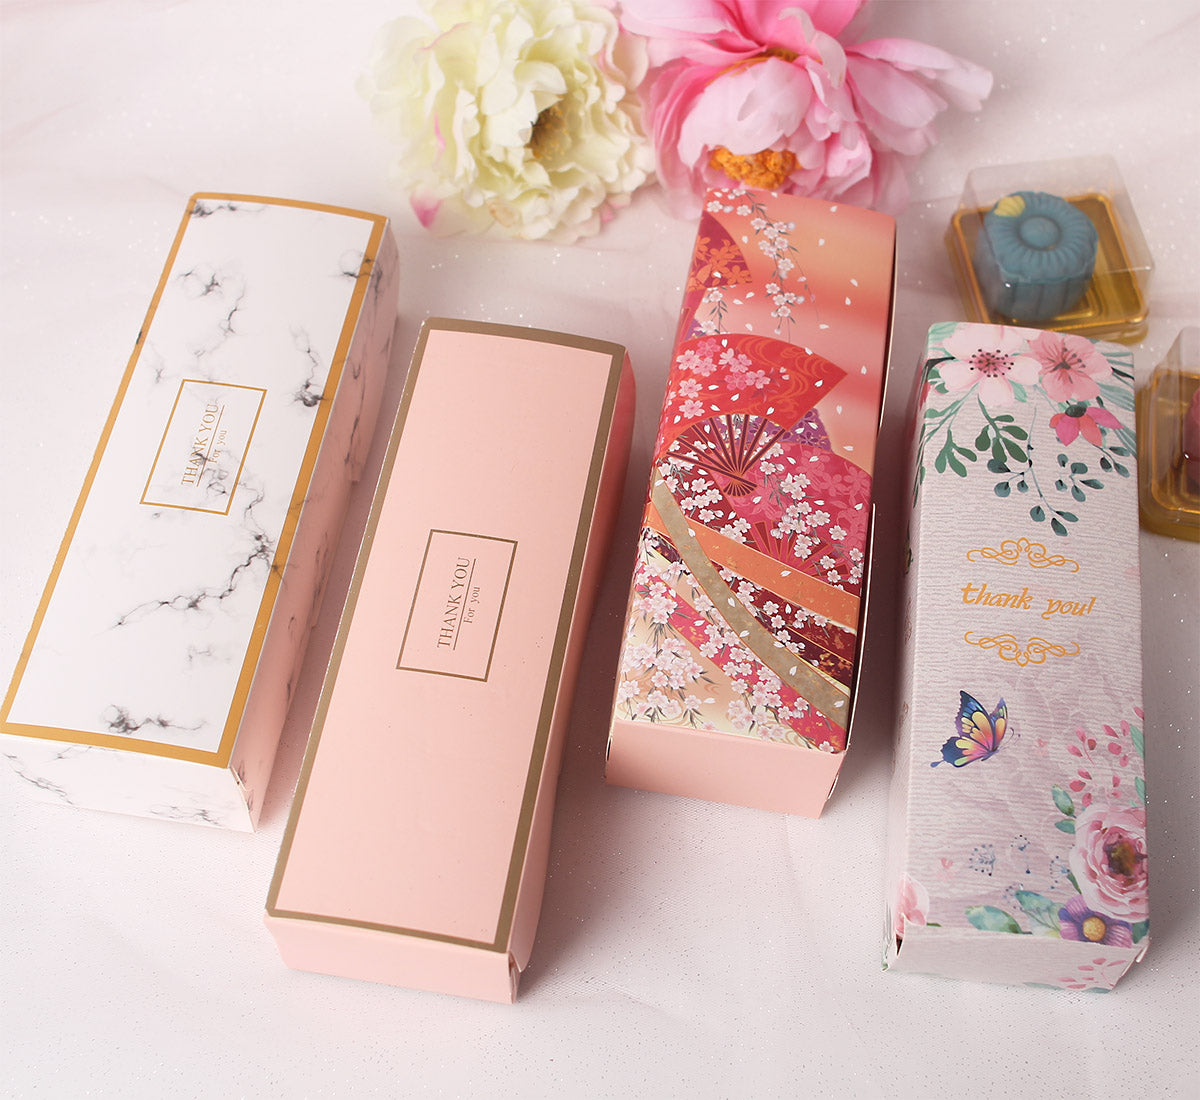 Mooncake box jelly sweets box Floral bouquet box 3 cavity mooncake box gift packaging cake box thank you